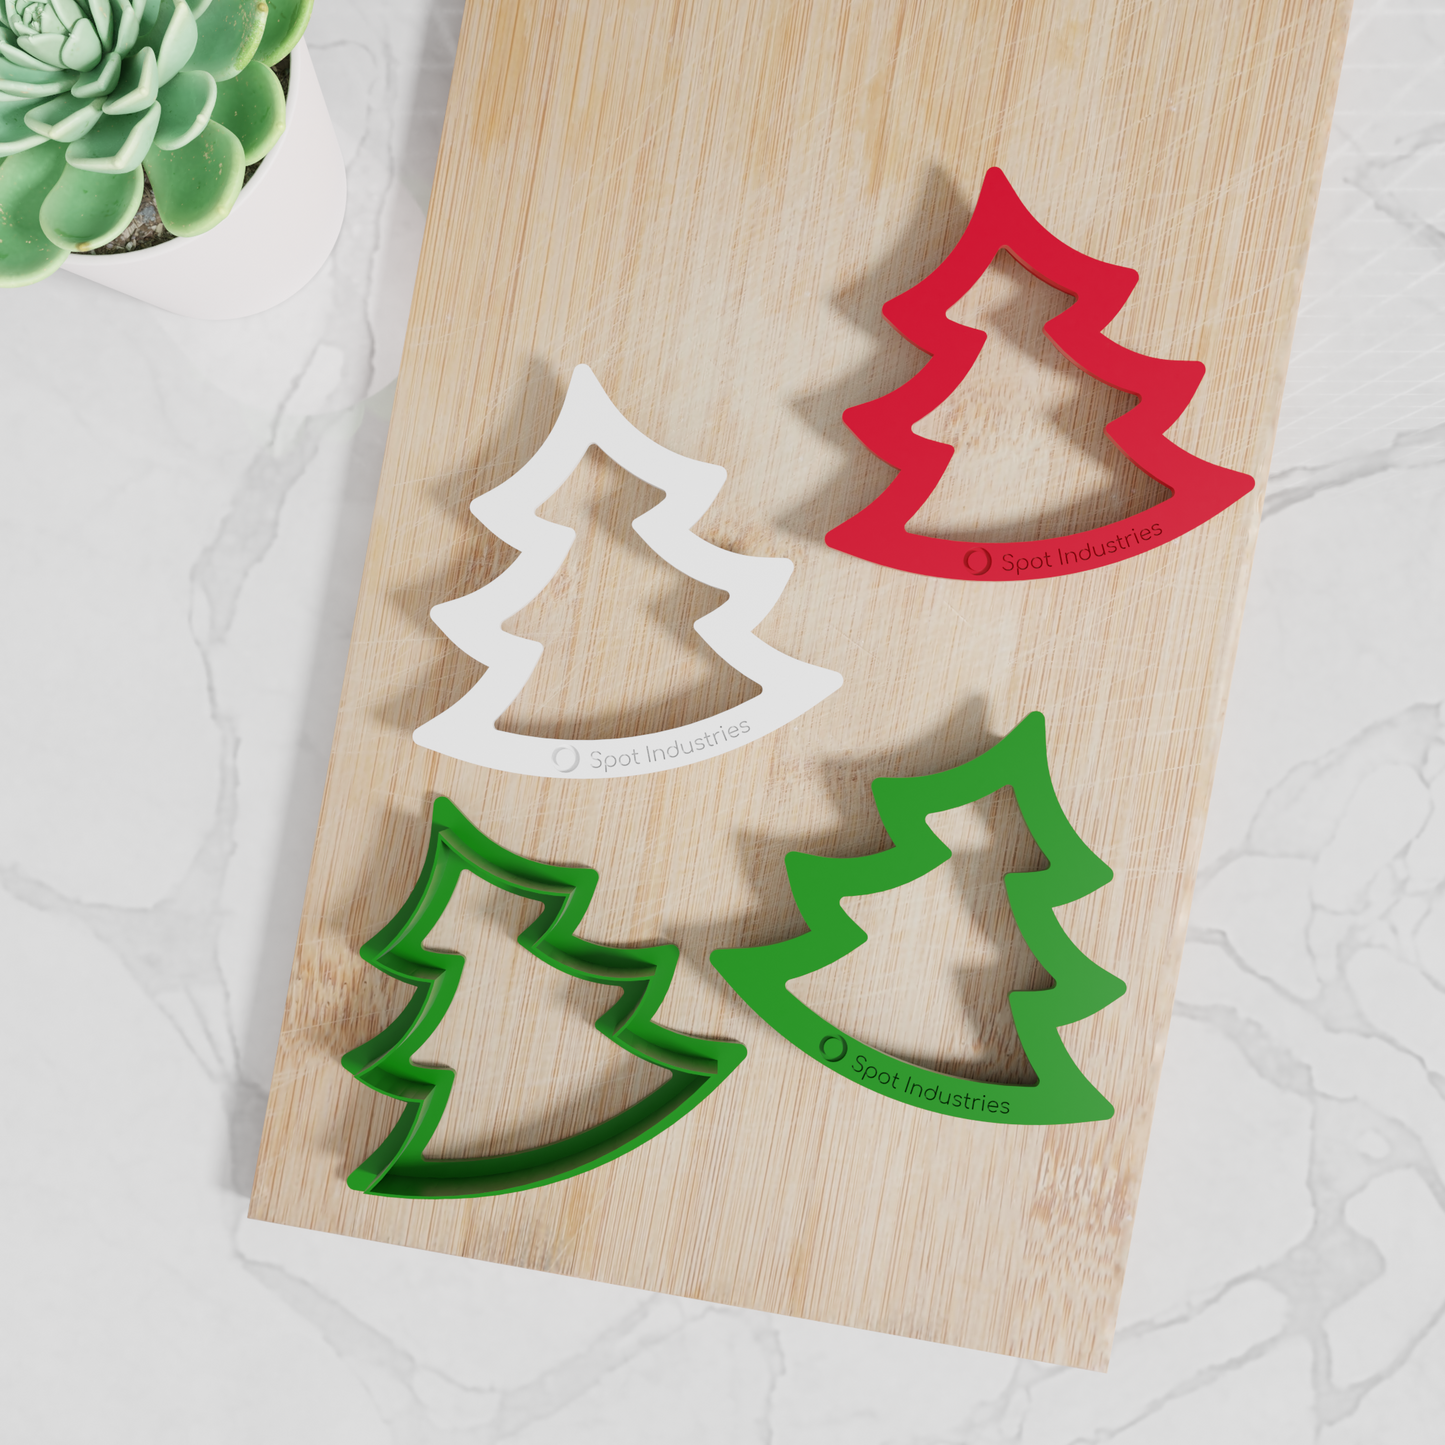 Easy Grip Christmas Tree Cookie Cutter Set For Kids & Adults! Custom Sizes, Multiple Colors. Work As Clay Cutter And Fondant Cutter Too!